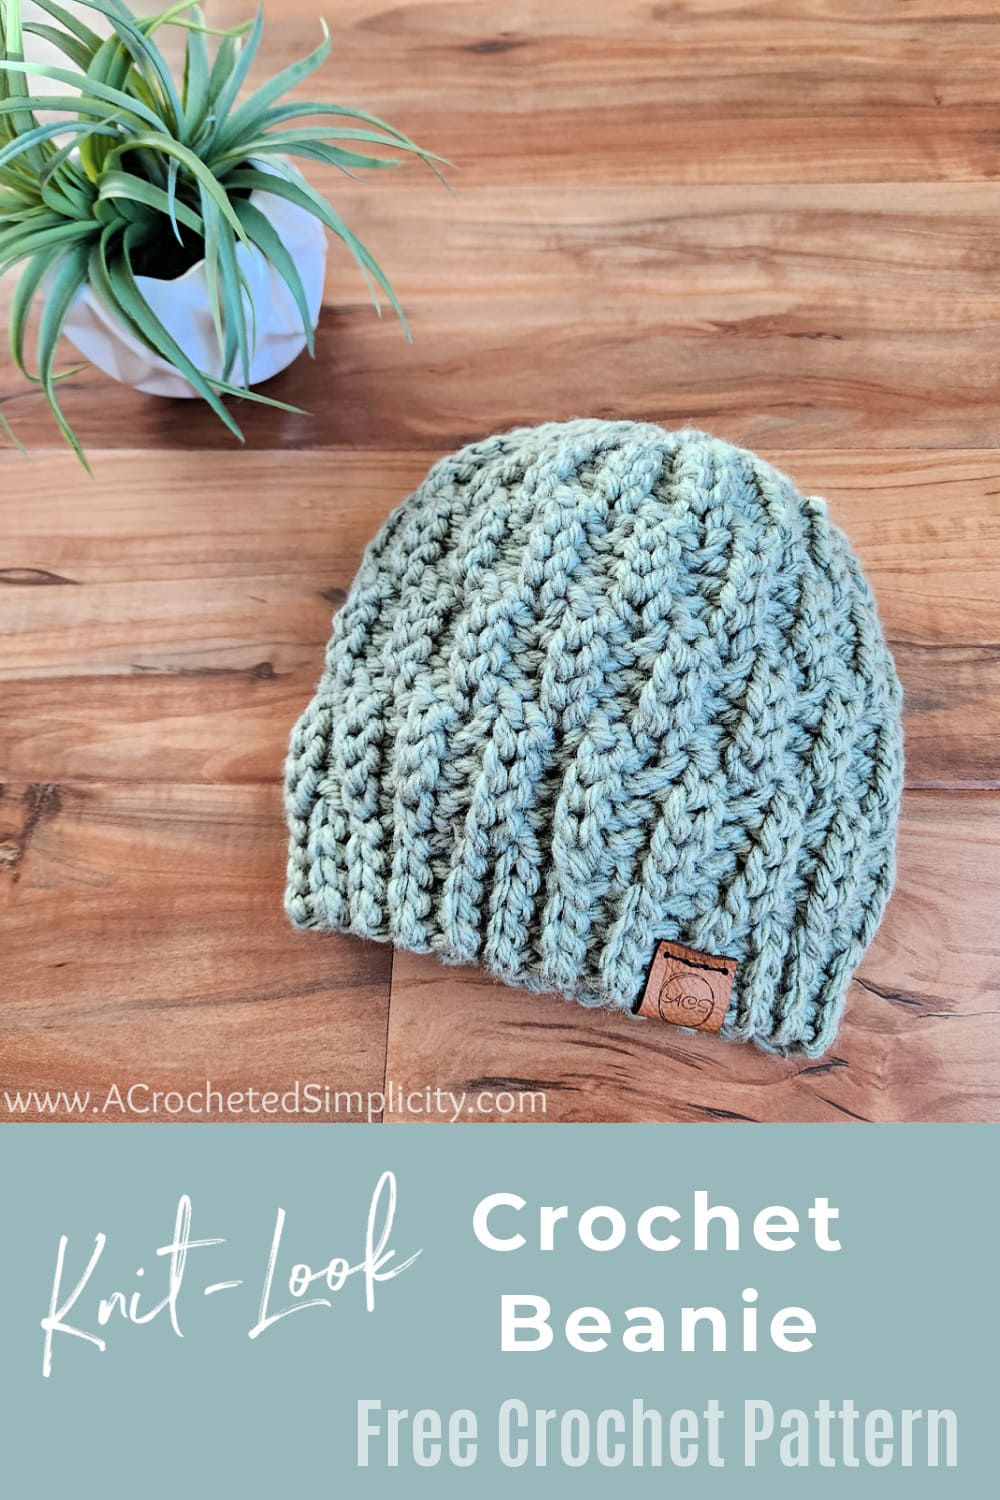 knit look chunky crochet beanie laying on wood with small plant pinterest image